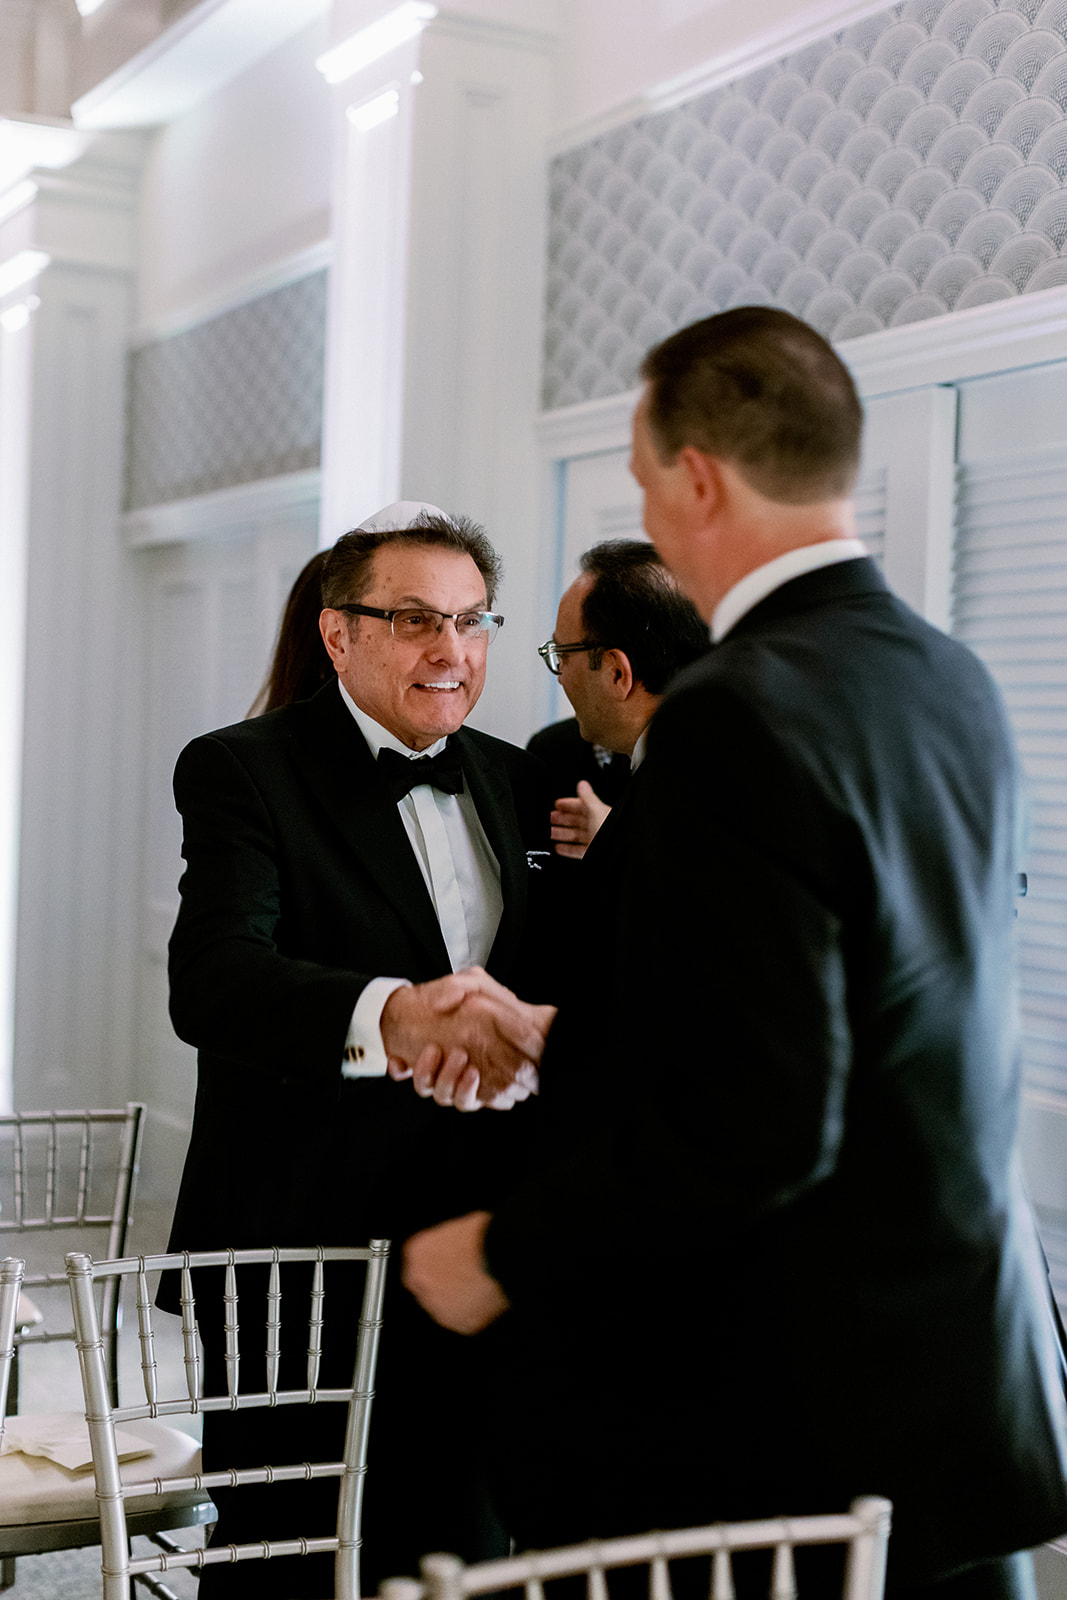 Candid moment of guests shaking hands pre-ceremony. 